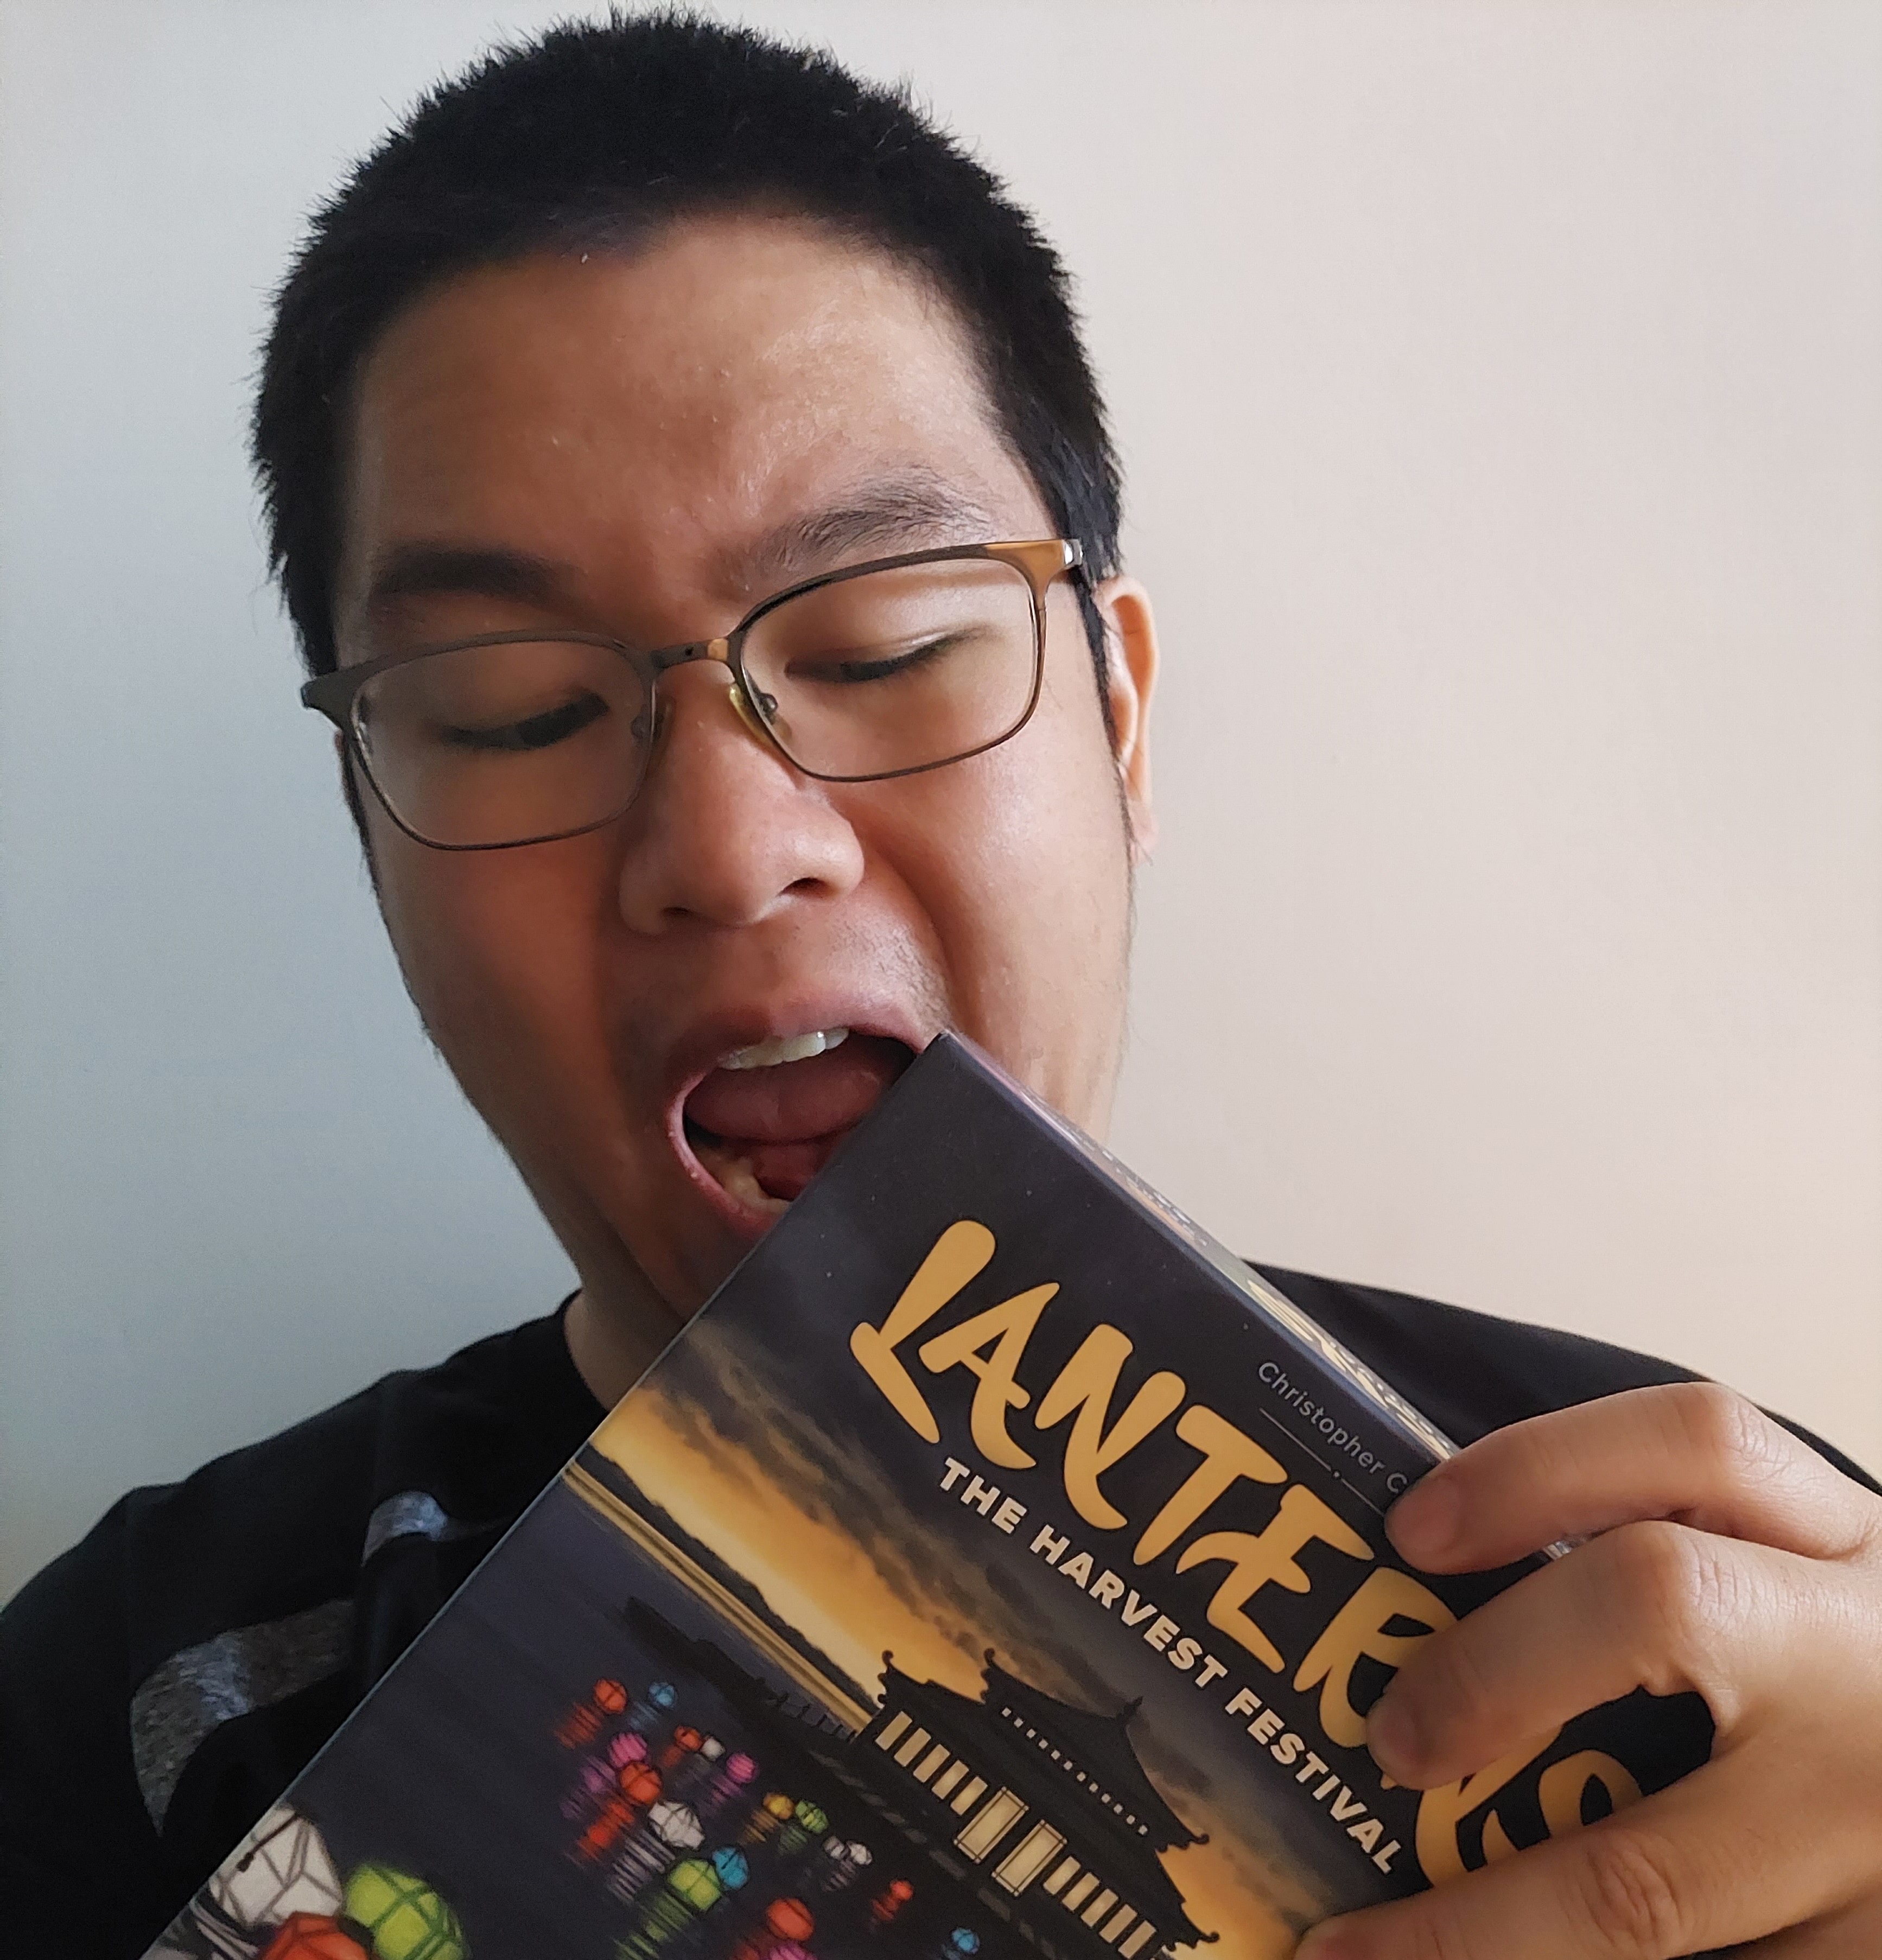 Christopher holding a copy of his game lanterns and pretending to take a bite